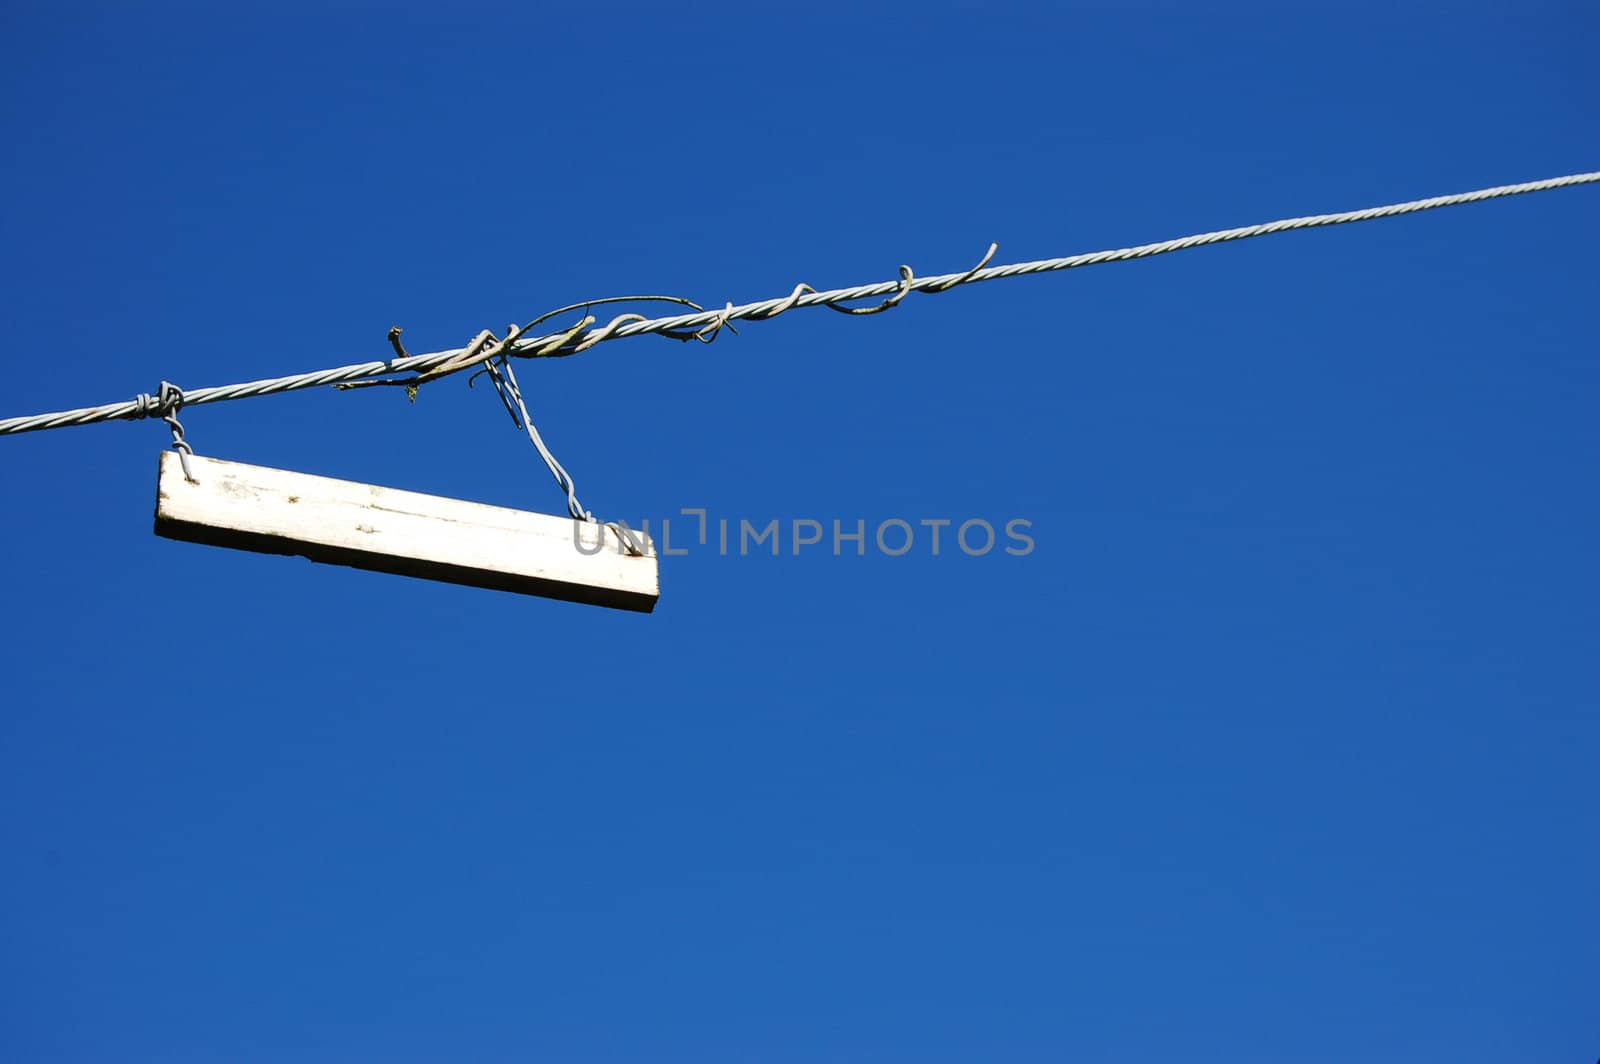 Plain white sign hung on a twisted metal cable against a blue sky